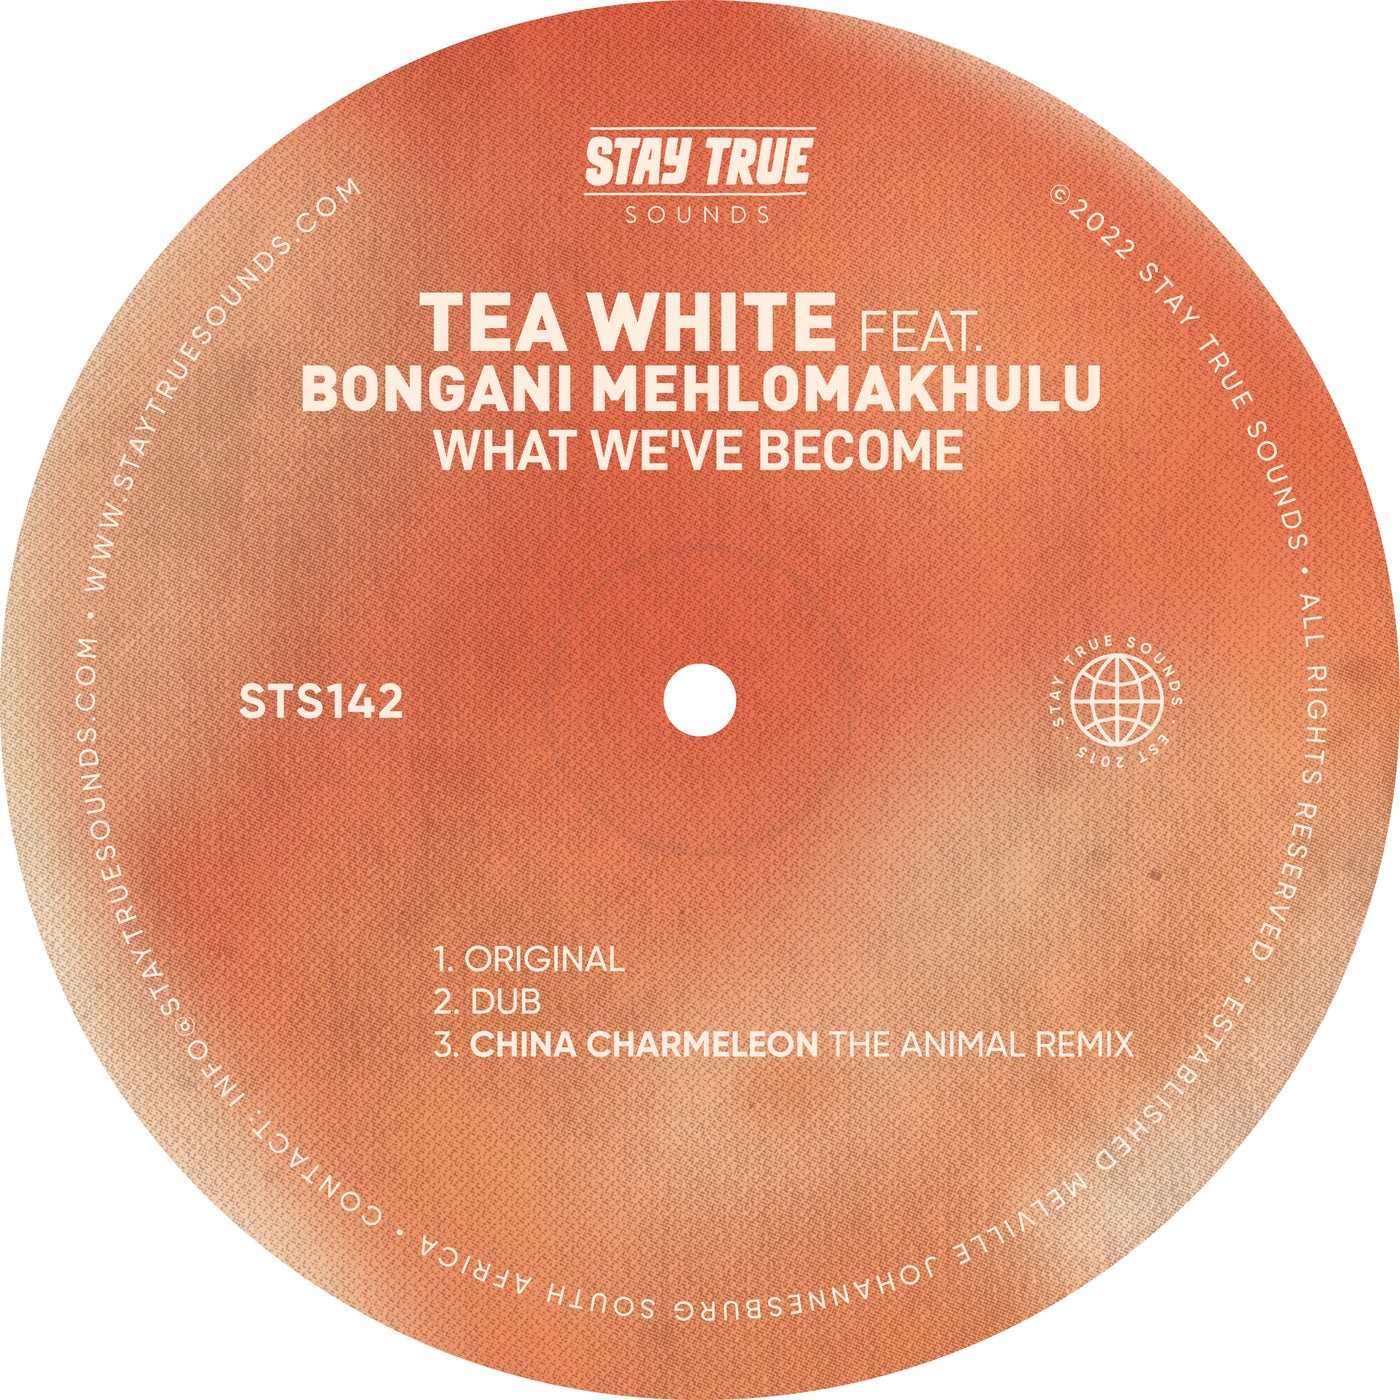 Tea White - What We've Become (feat. Bongani Mehlomakhulu) [Stay True Sounds]